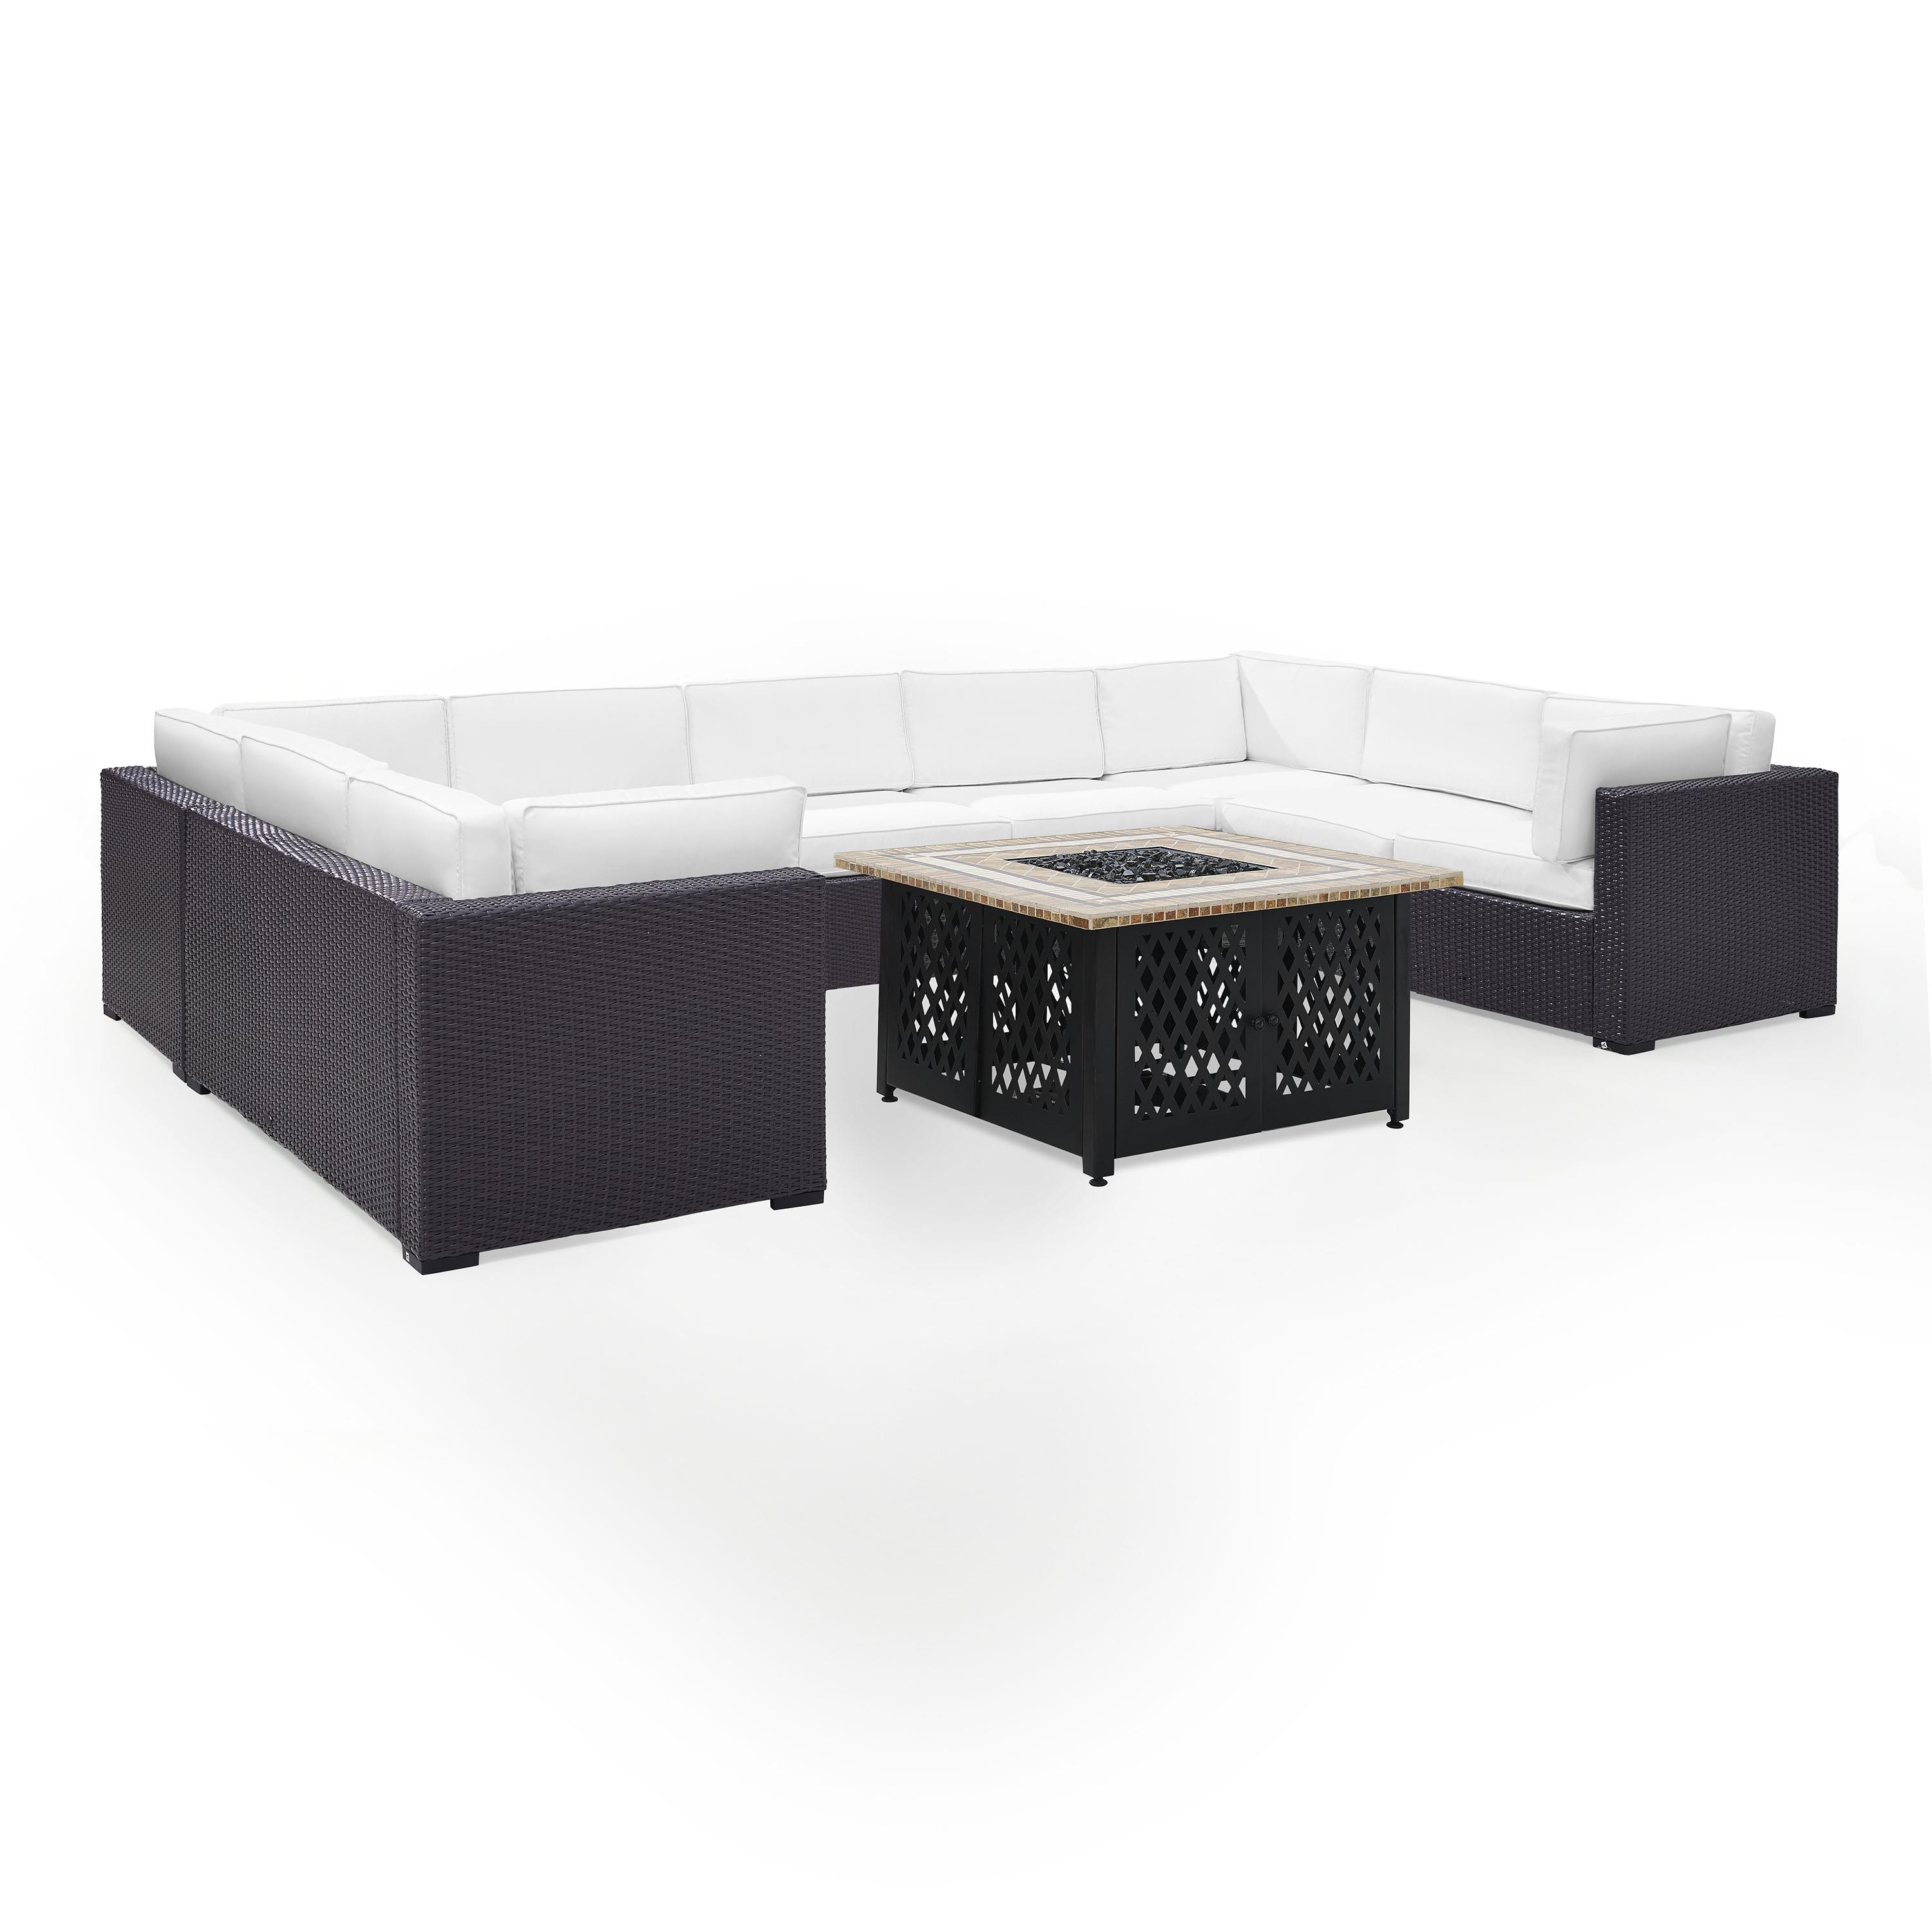 Crosley Furniture Biscayne 6PC Fabric Patio Fire Pit Sectional Set in White - image 3 of 4